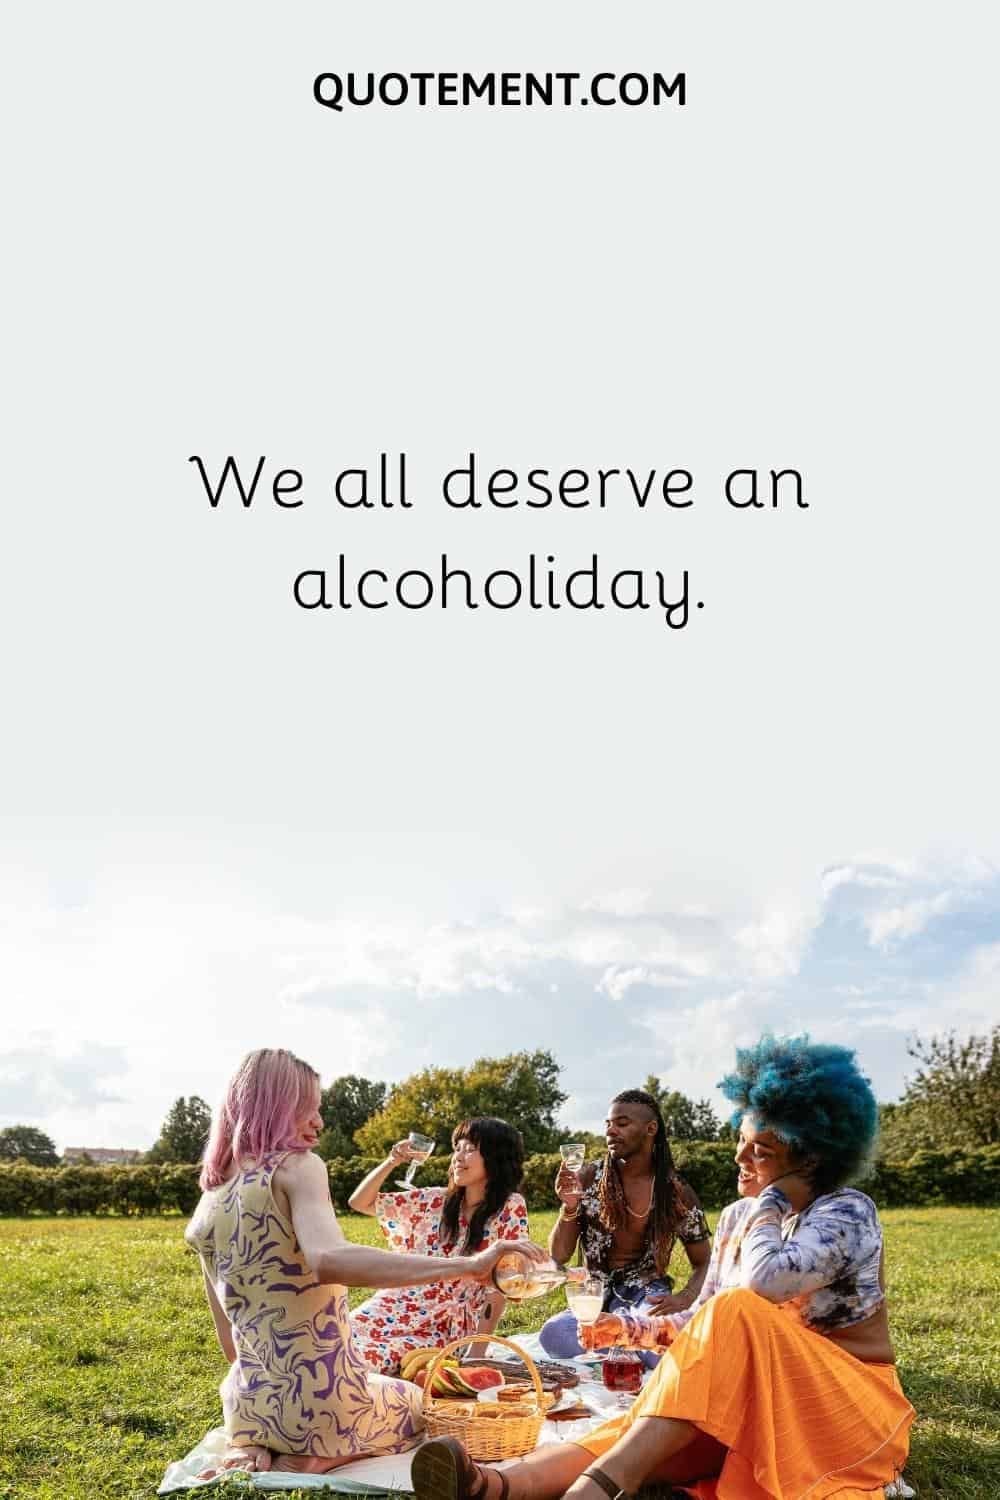 We all deserve an alcoholiday.